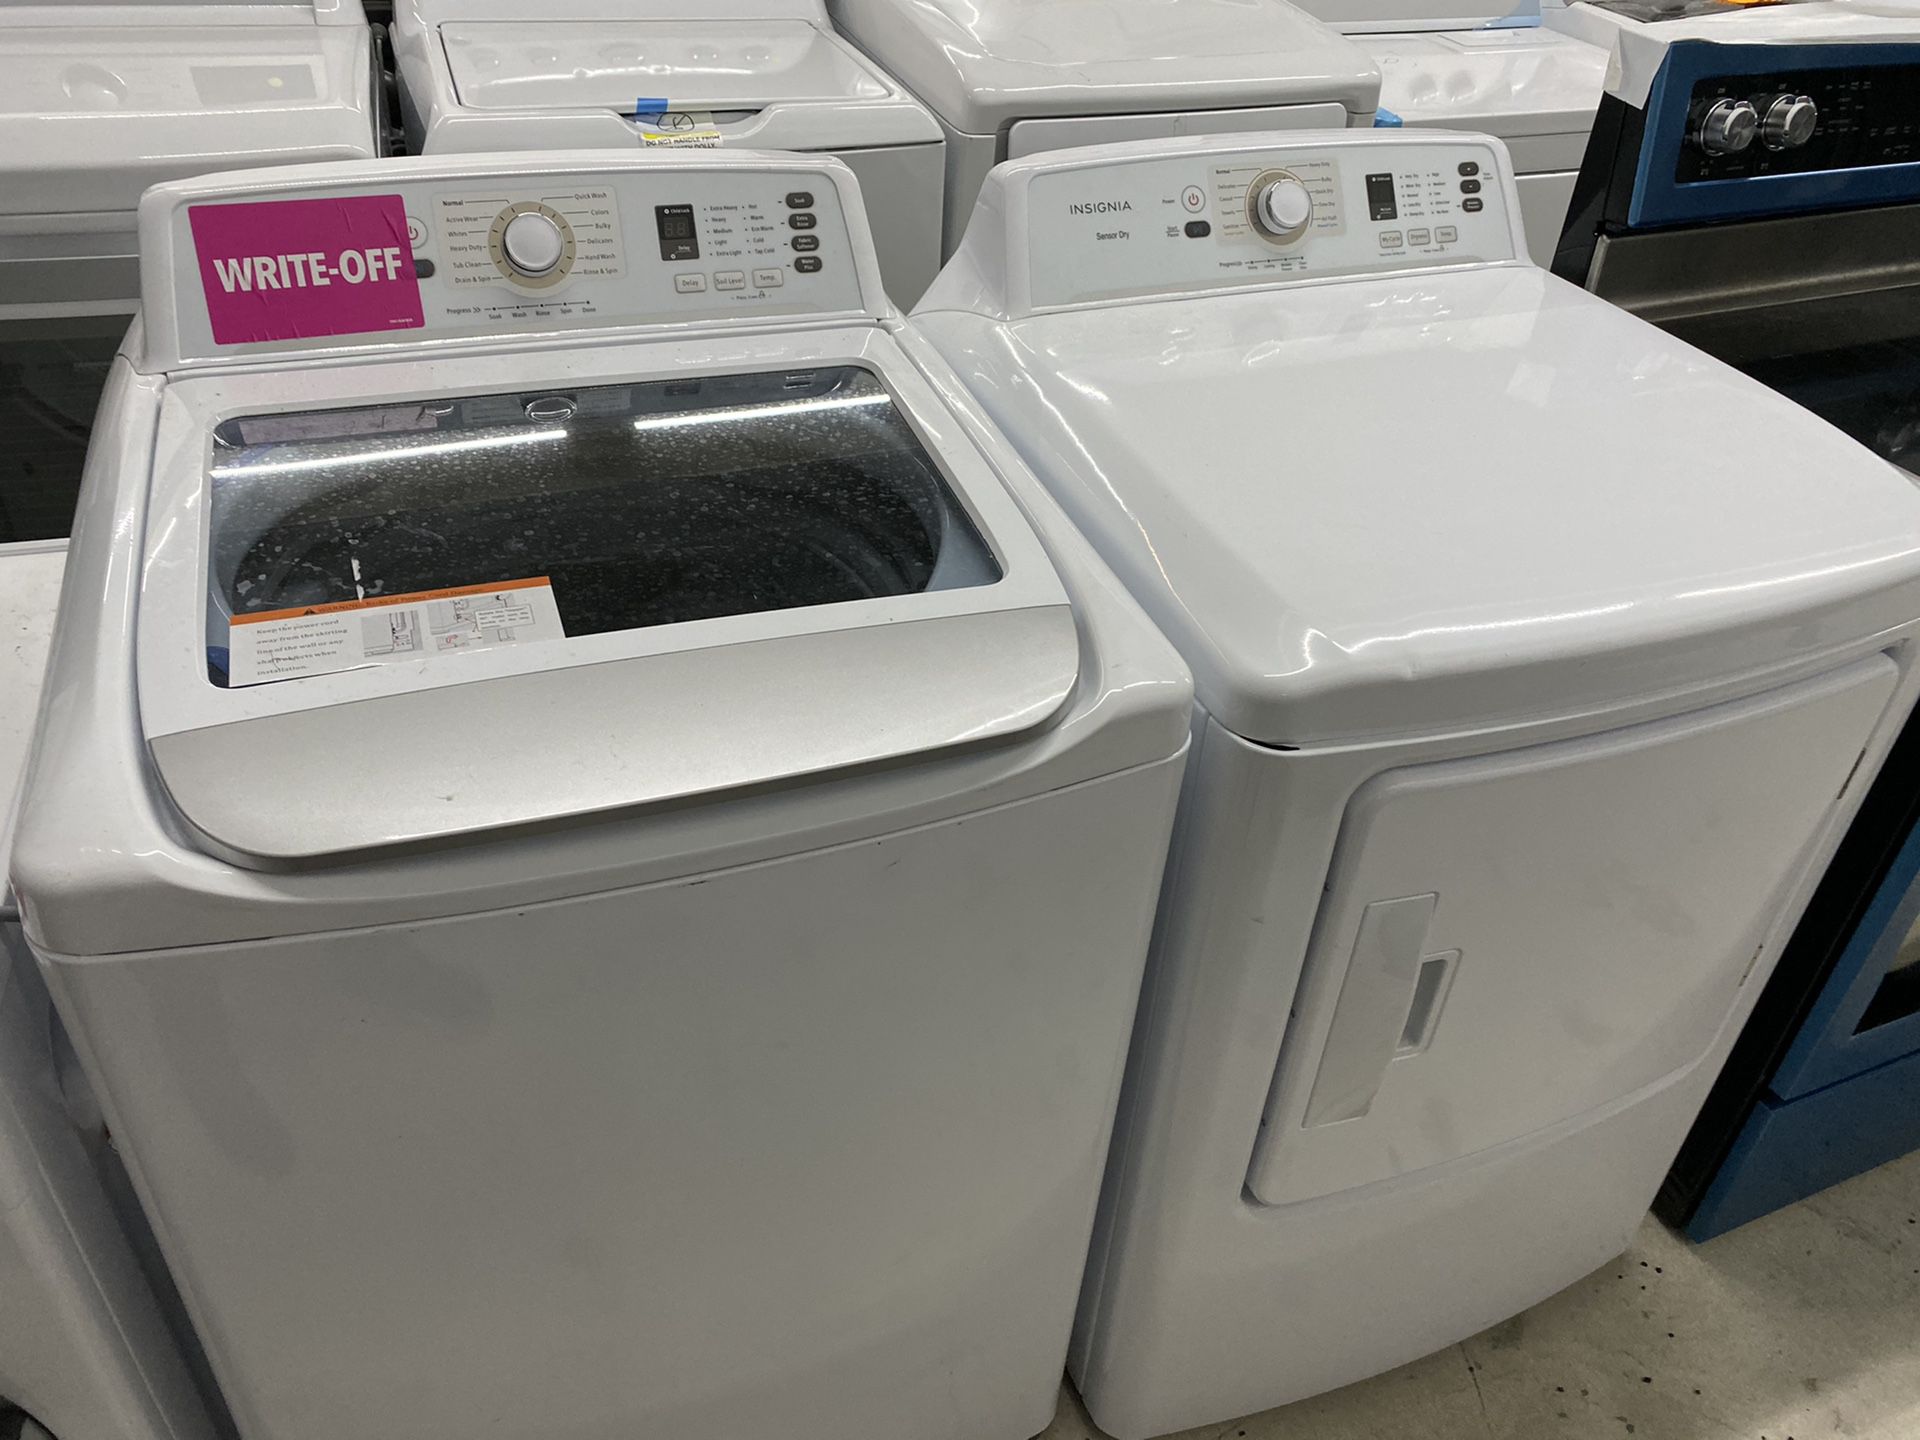 Washer and dryer insignia new scratch and dent 1 year manufacturing warranty free delivery